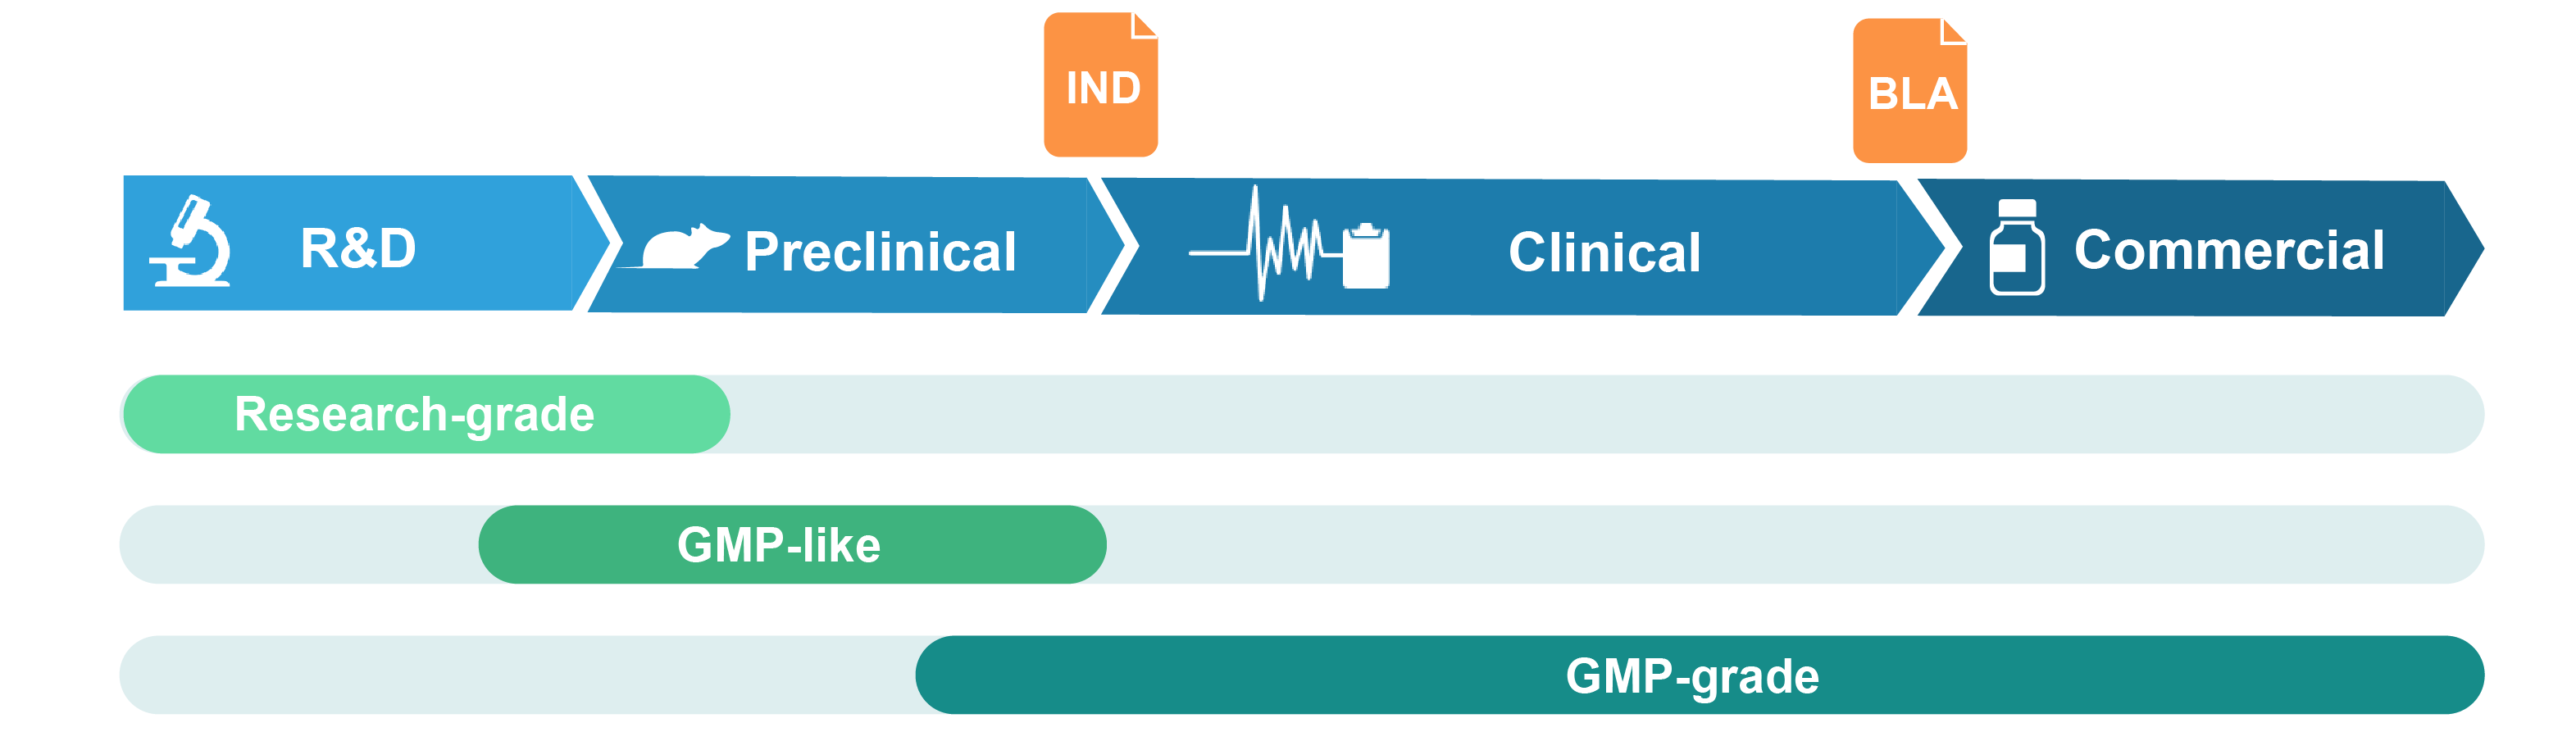 GMP-like viral vectors for preclinical studies and GMP-grade plasmid for clinical and commercial use.